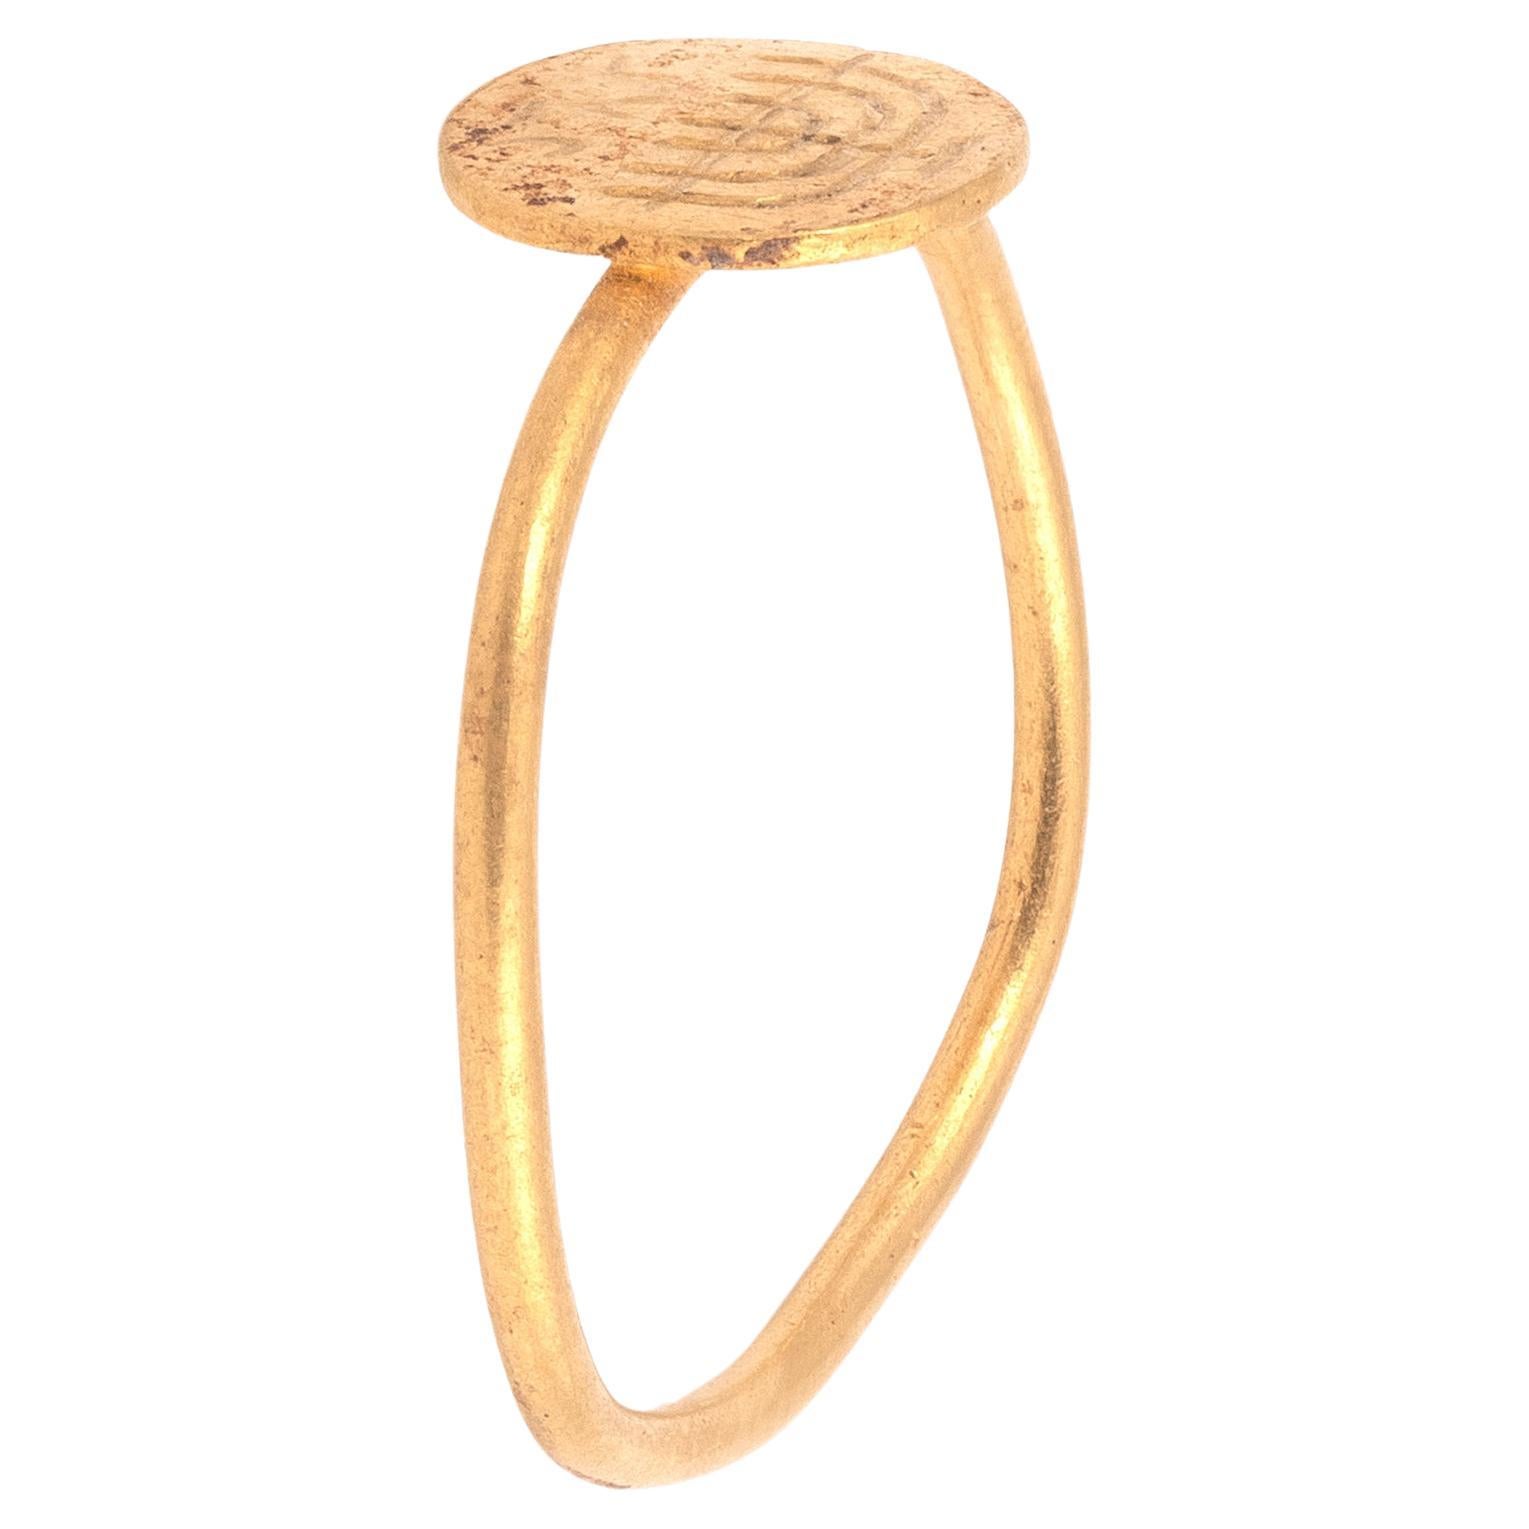 A Byzantine gold ring with a jewish menorah and an inscription. A typical early Byzantine ring made with soldered circular section wire and round bezel, engraved with a candelabra for seven lamps and three letters.
Diameter: 26 mm.
Weight: 3.99